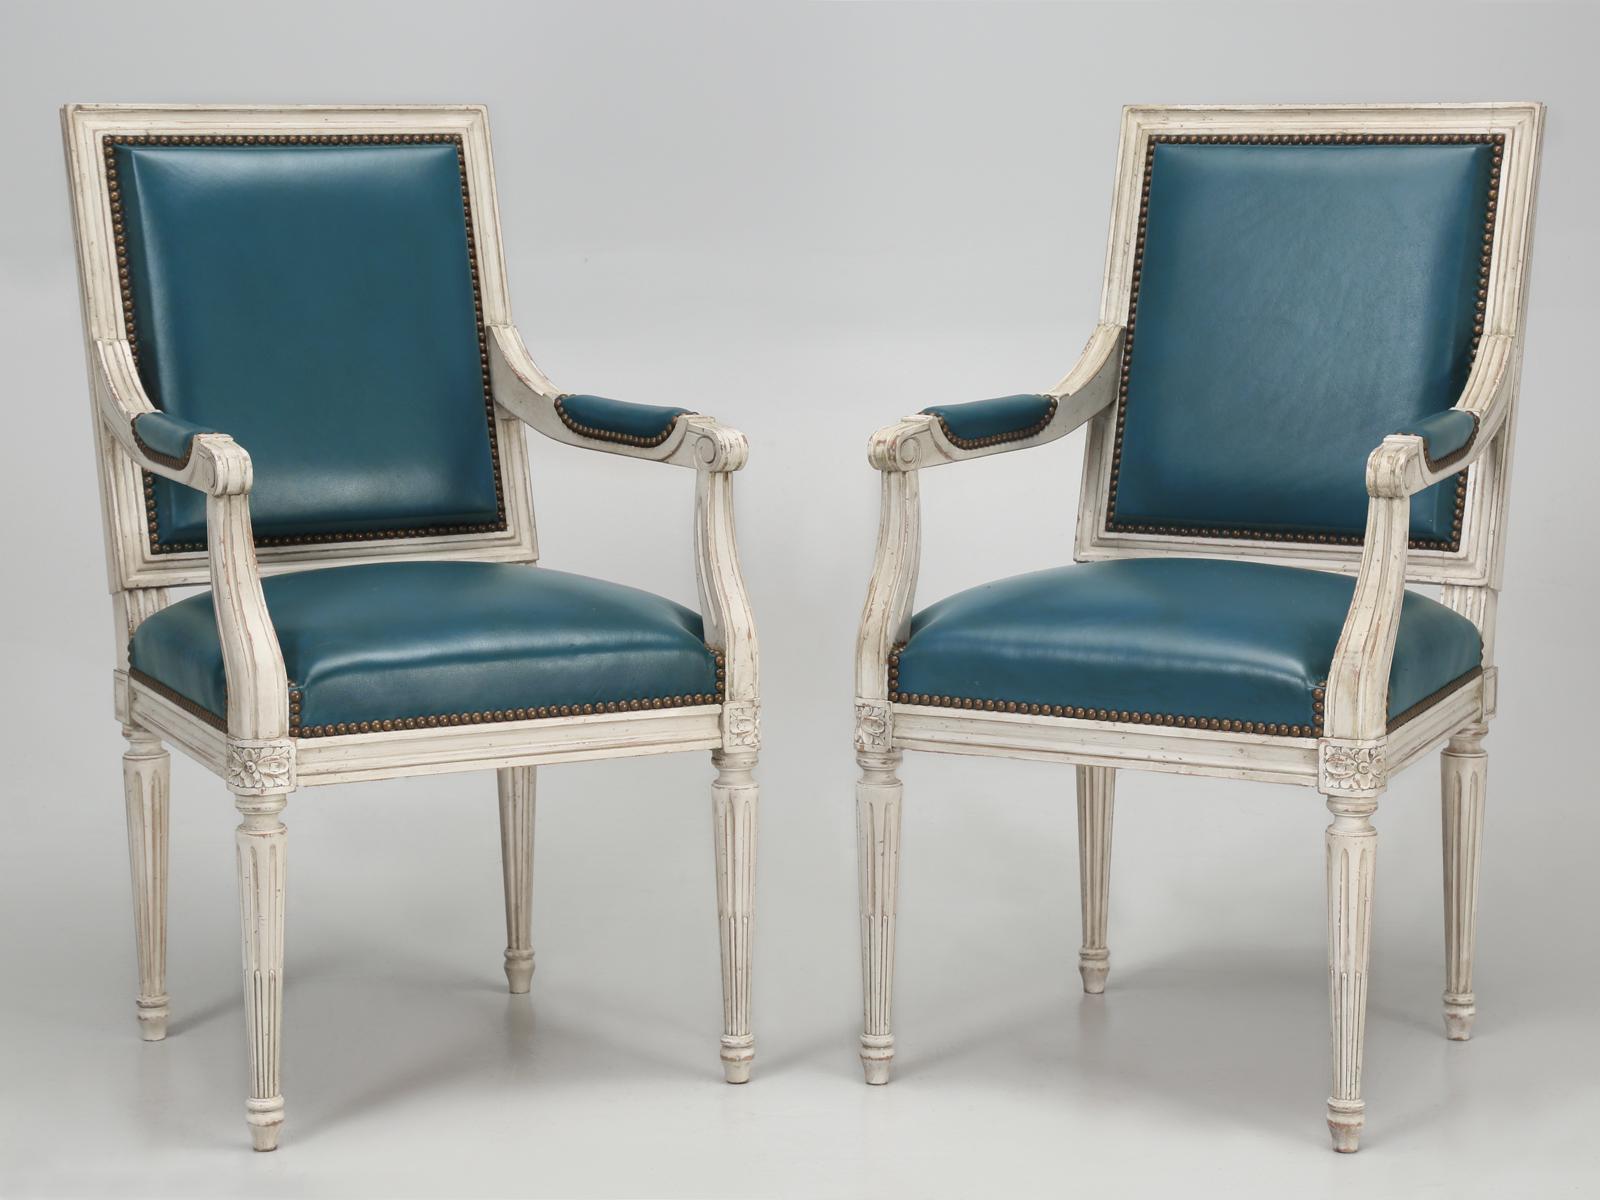 From the Old Plank Collection, comes a Louis XVI style dining chair, made in France, by an elderly gentleman, who has been crafting French dining chairs his entire life. Our French Louis XVI style chairs are available in the flat, as we like to call